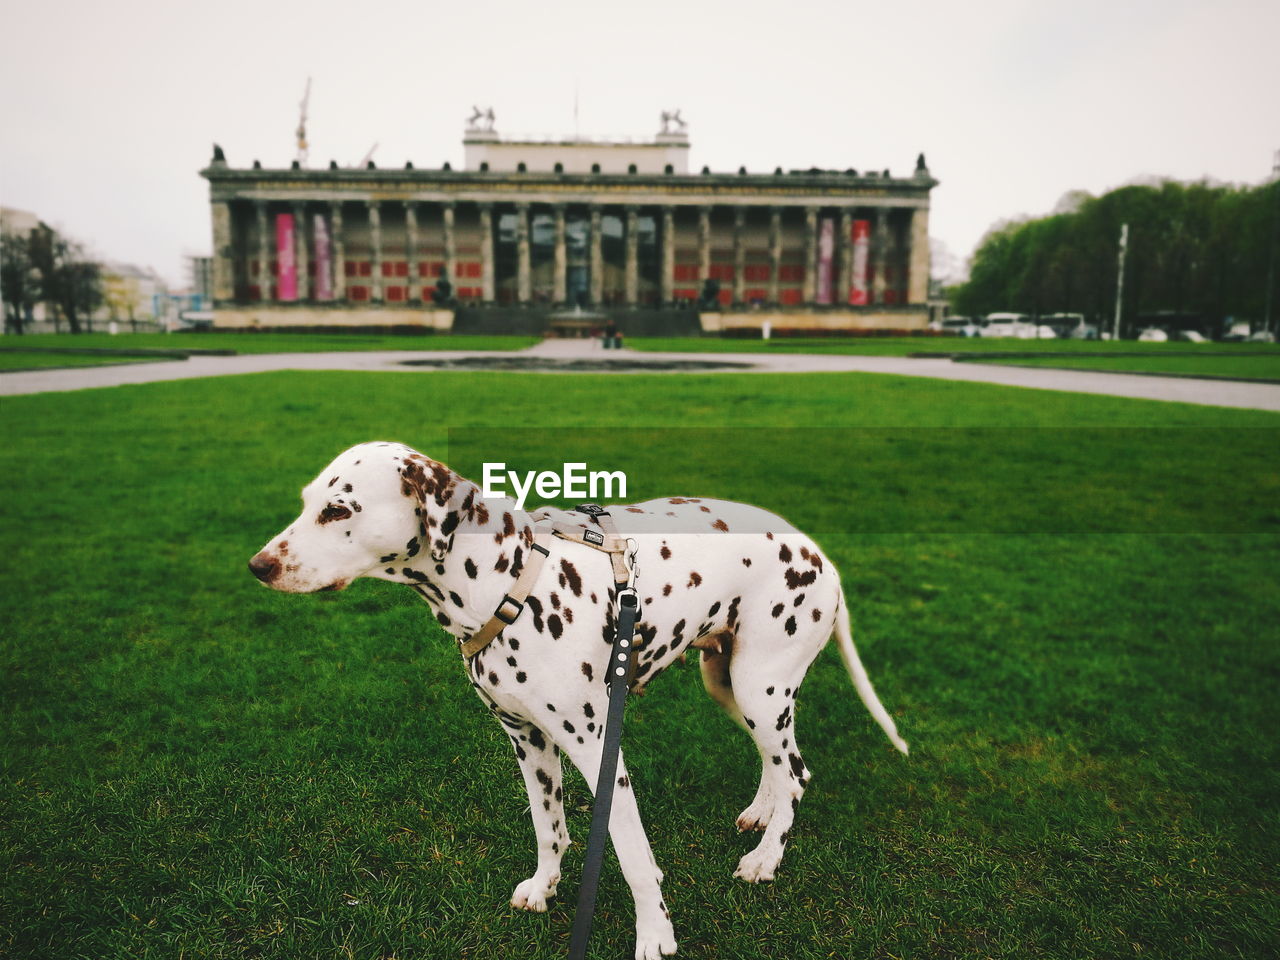 Dalmatian dog standing on grassy field against altes museum